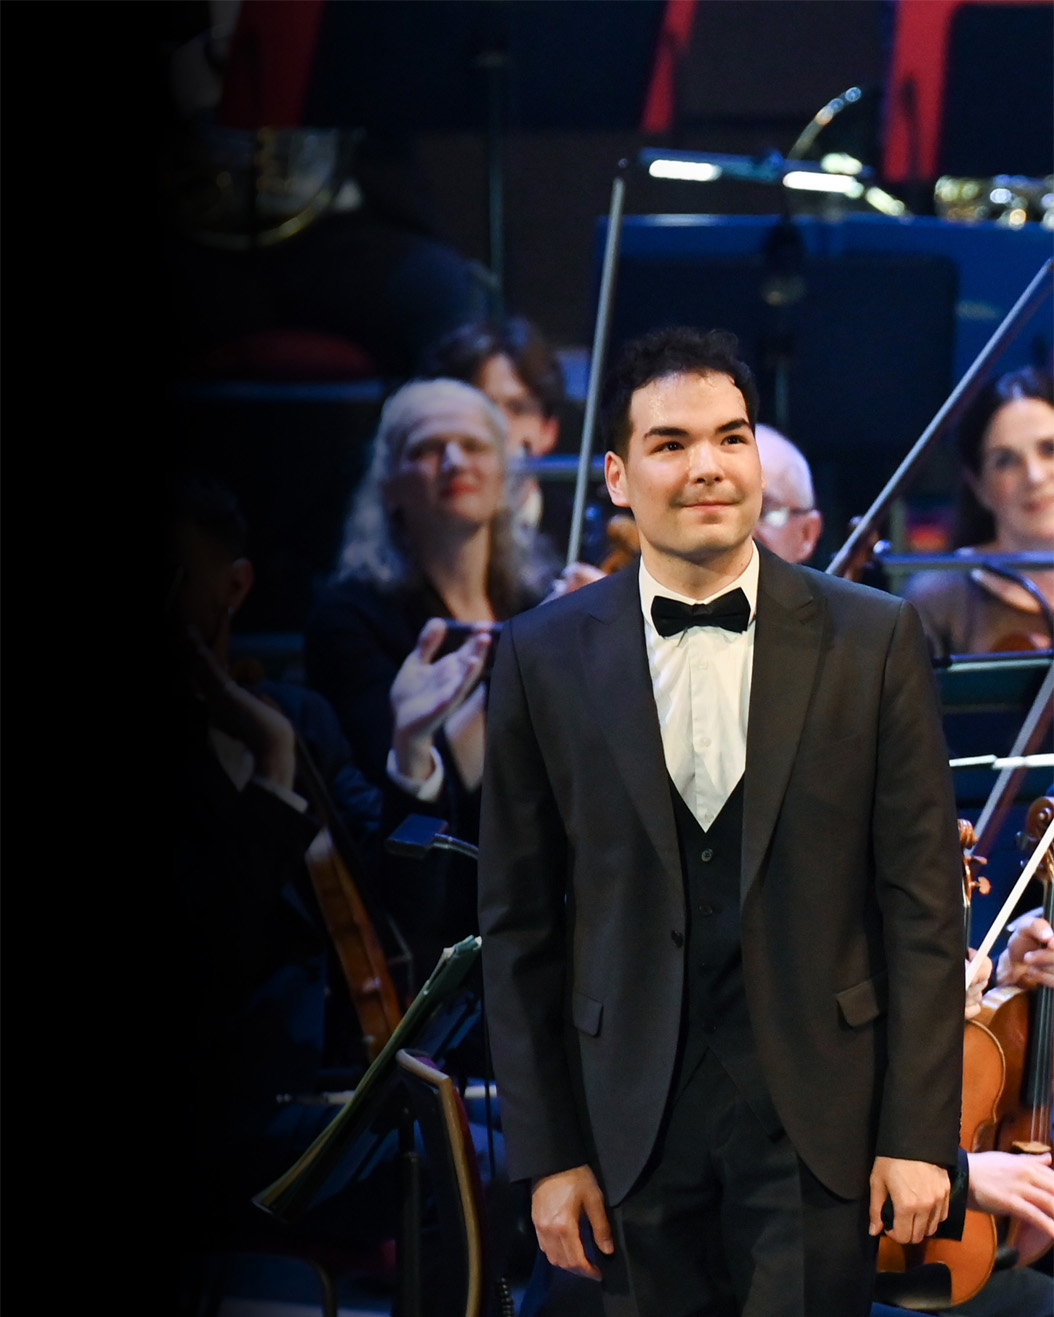 A man wearing smart attire, standing in front of an orchestra, also wearing smart attire and holding musical instruments, with the conductor clapping. 